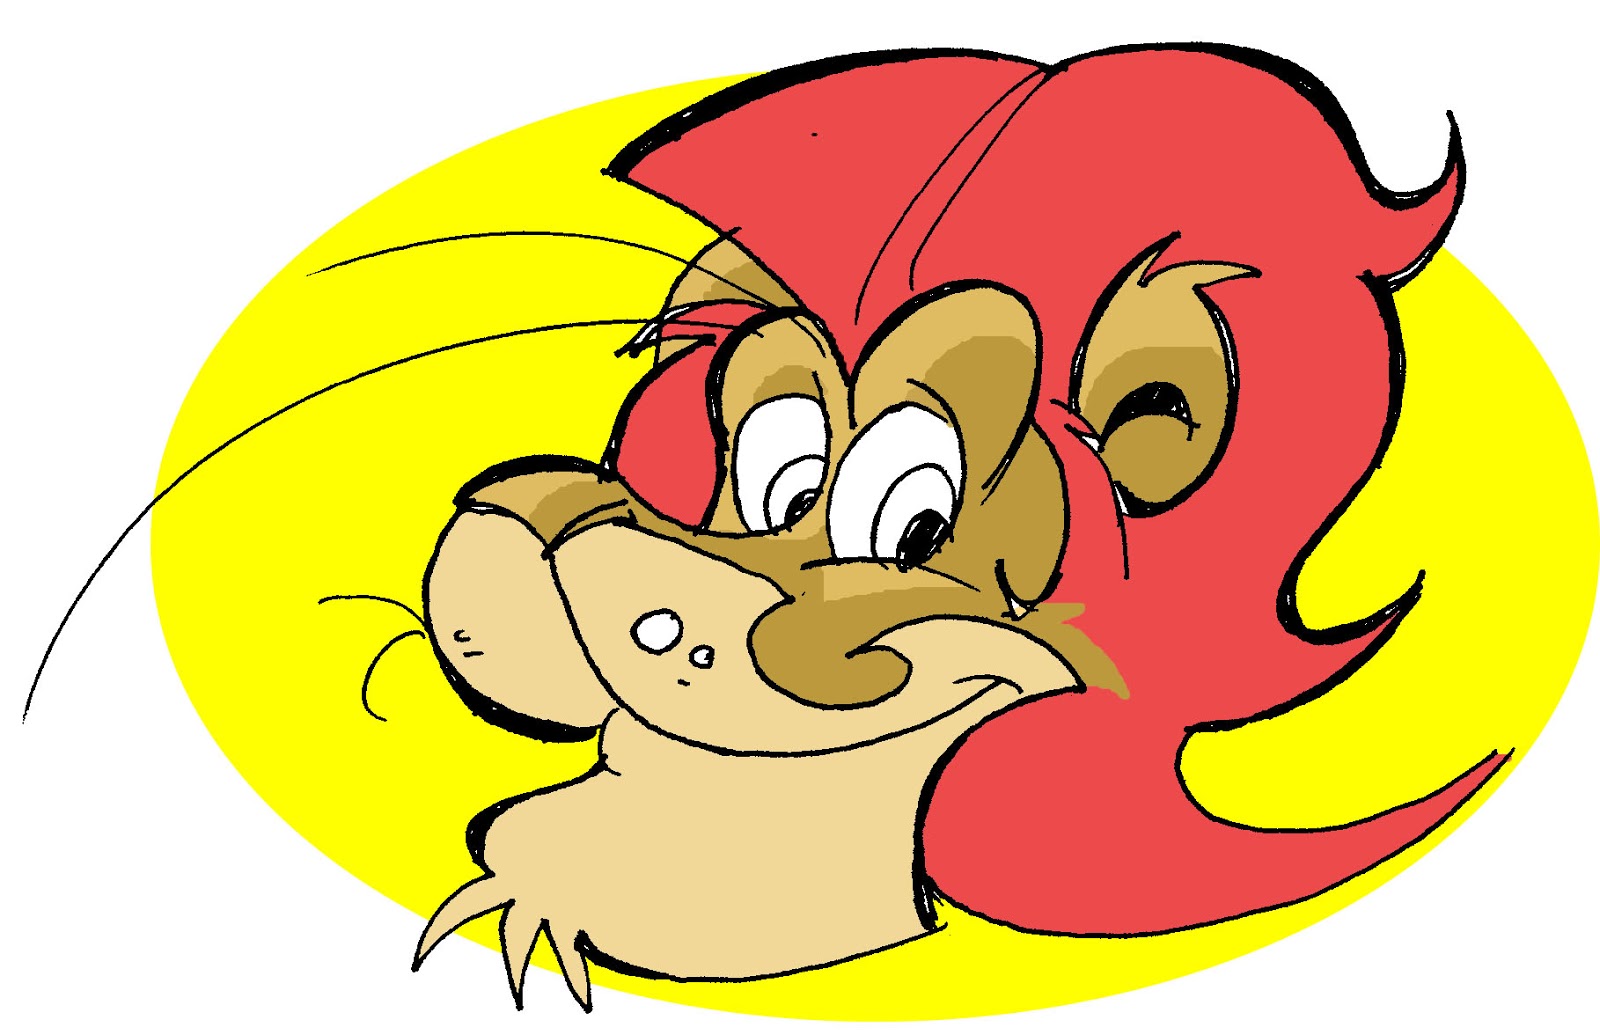 Diary of a Cartoonist: How to Draw a cartoon Lion---Part 1 the Head